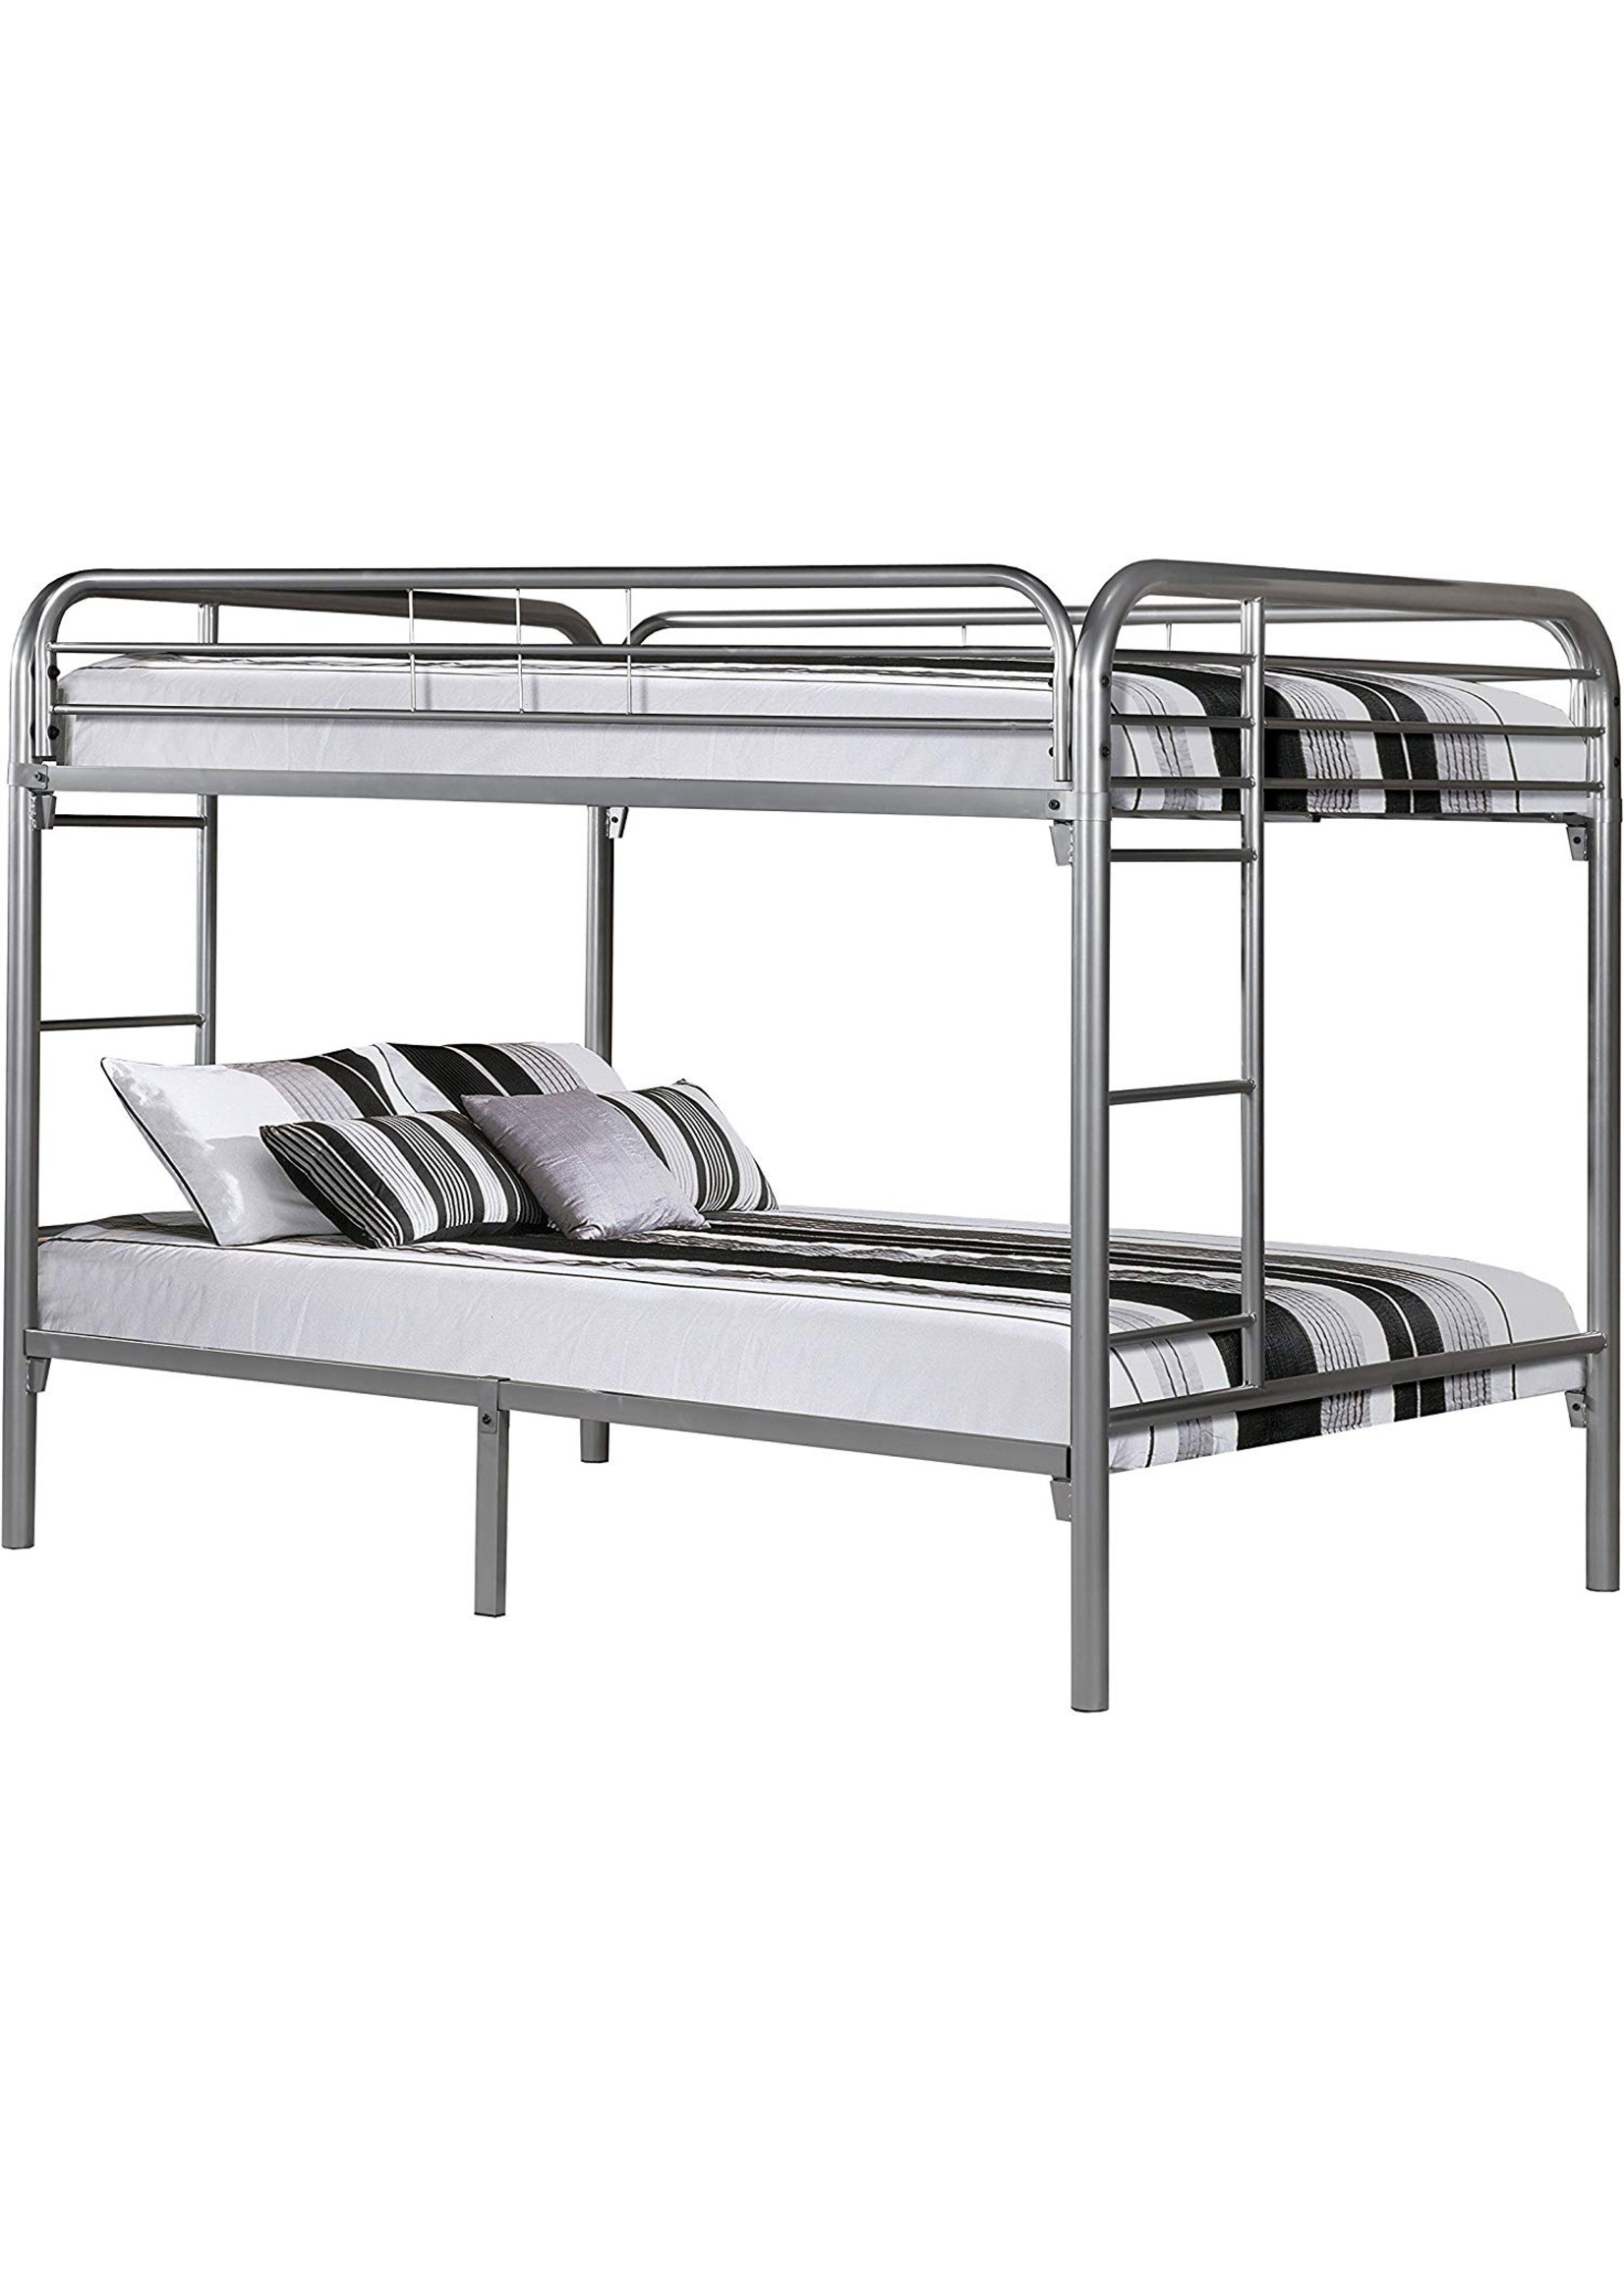 BUNK BED - FULL / FULL SIZE / SILVER METAL